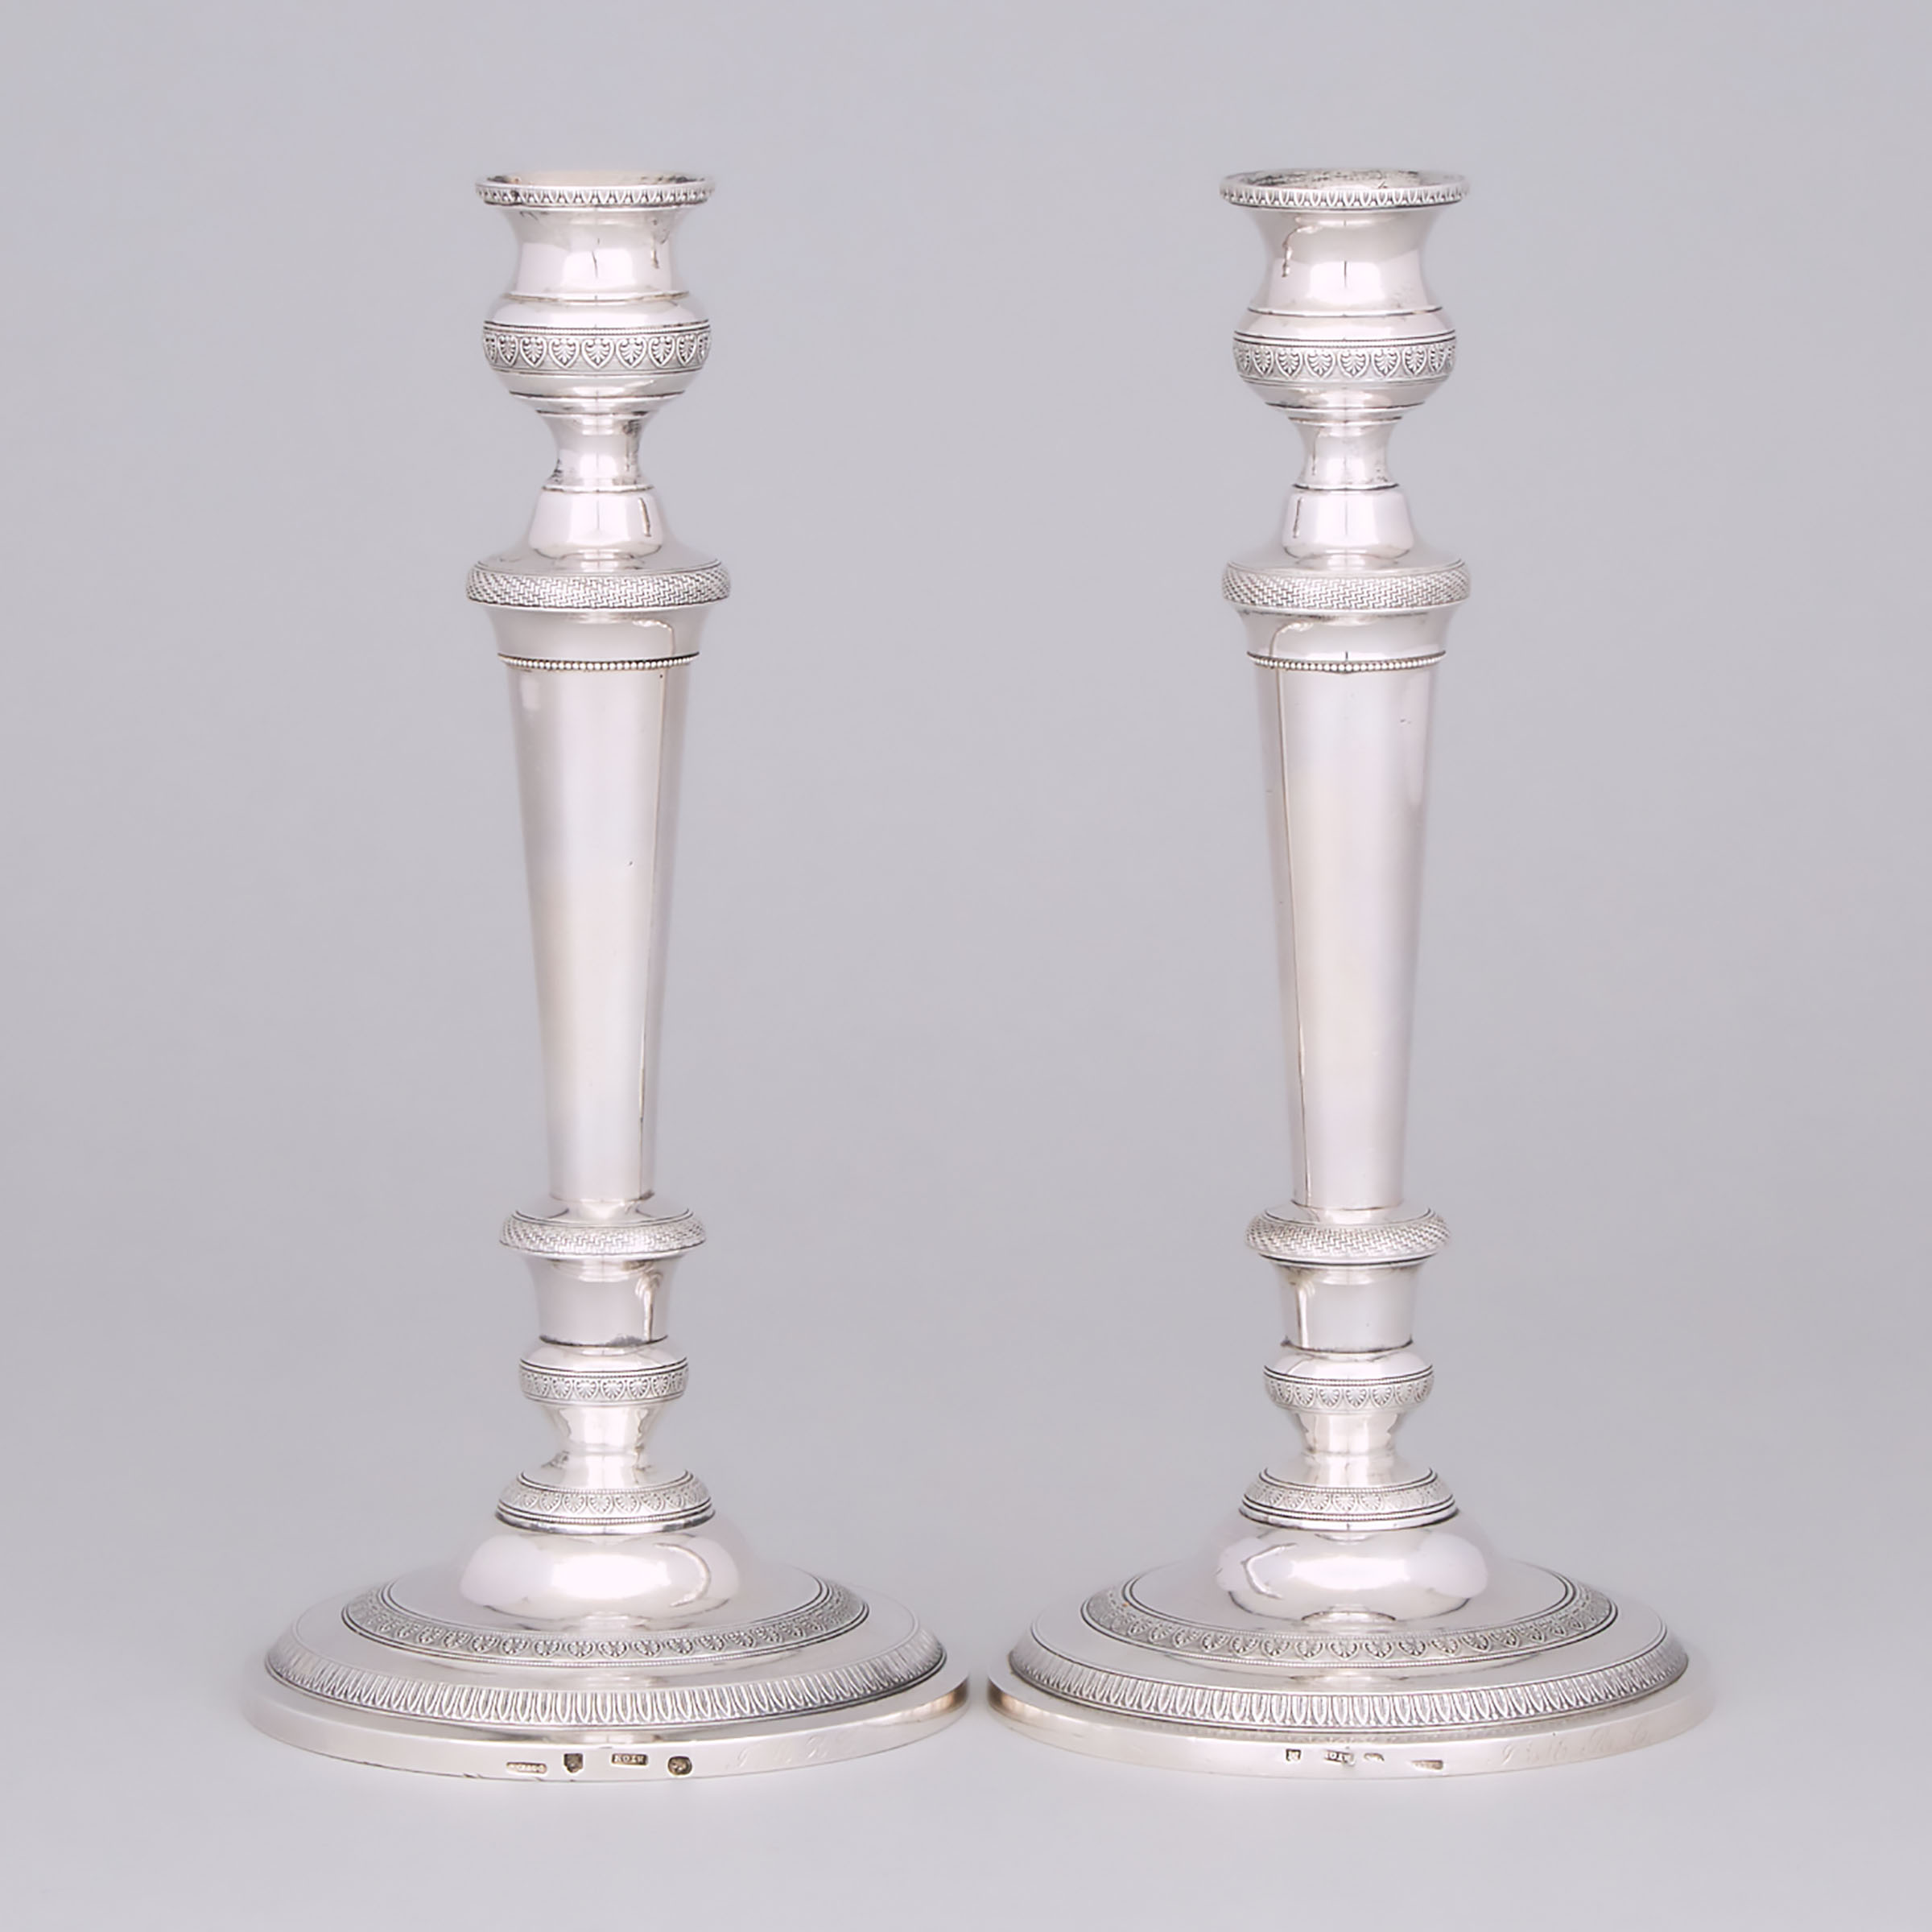 Pair of Mexican Silver Table Candlesticks, Y. Duran, Mexico City, c.1830